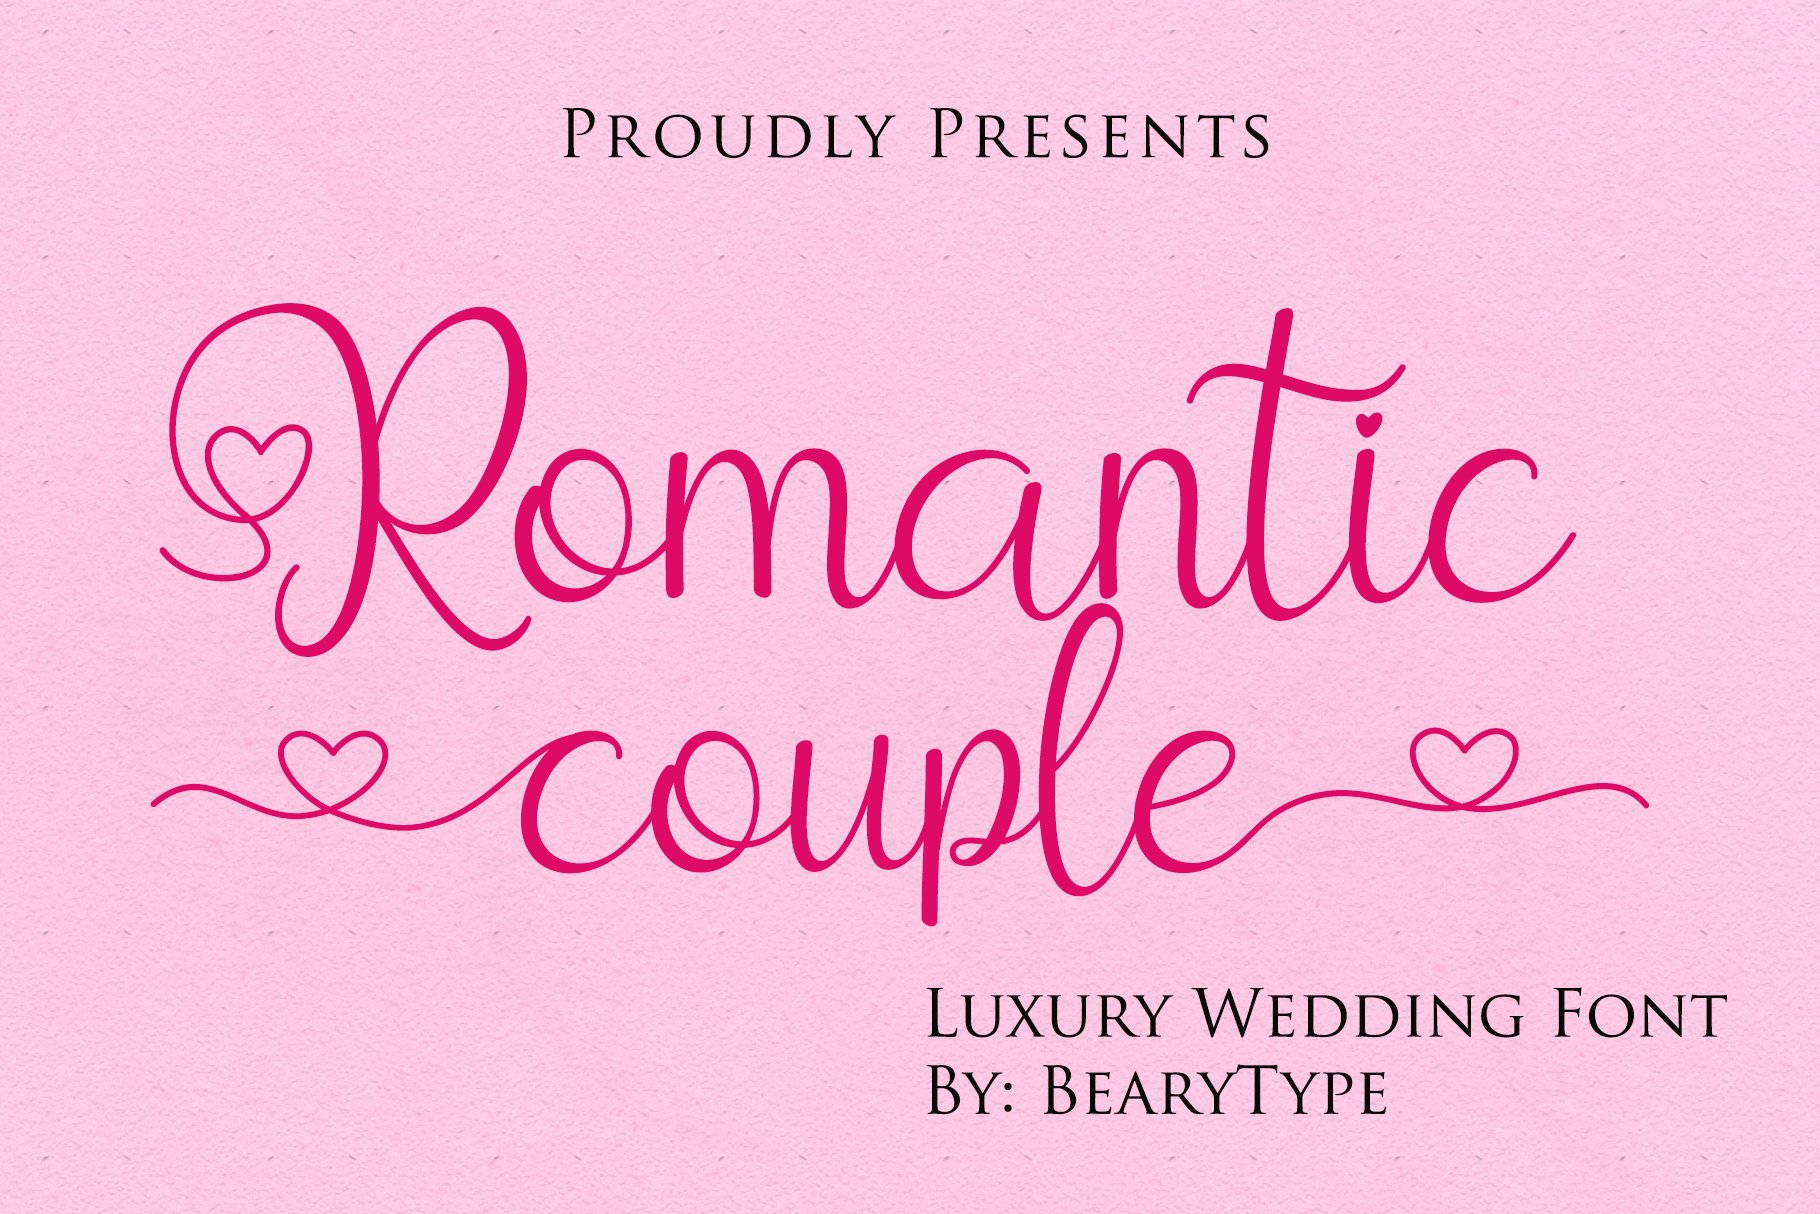 Romantic Couple / modern calligraphy cover image.